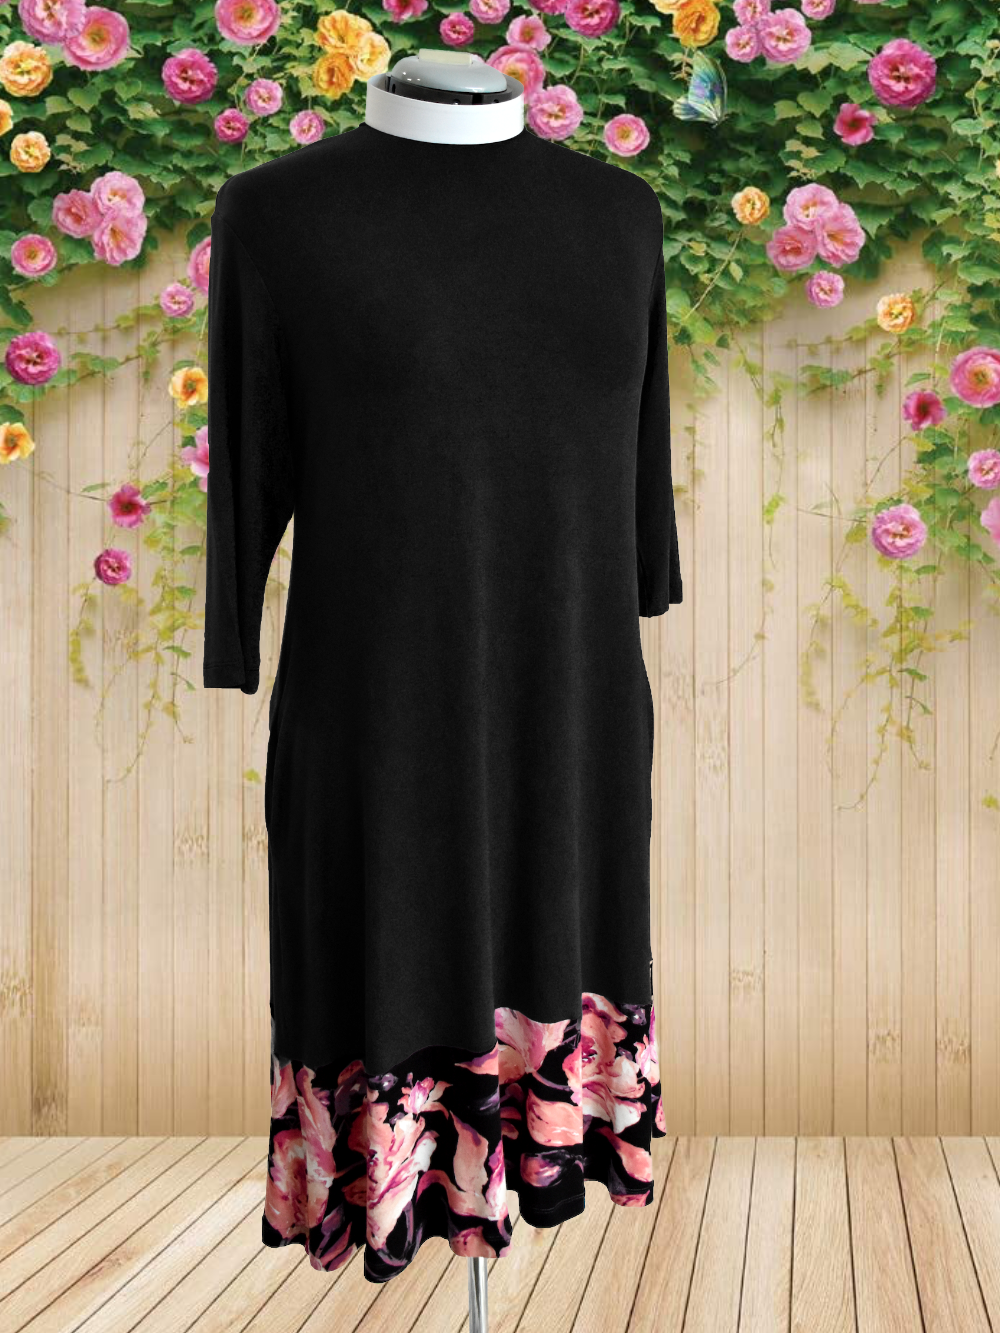 Two Tone Dress - ClergyImage